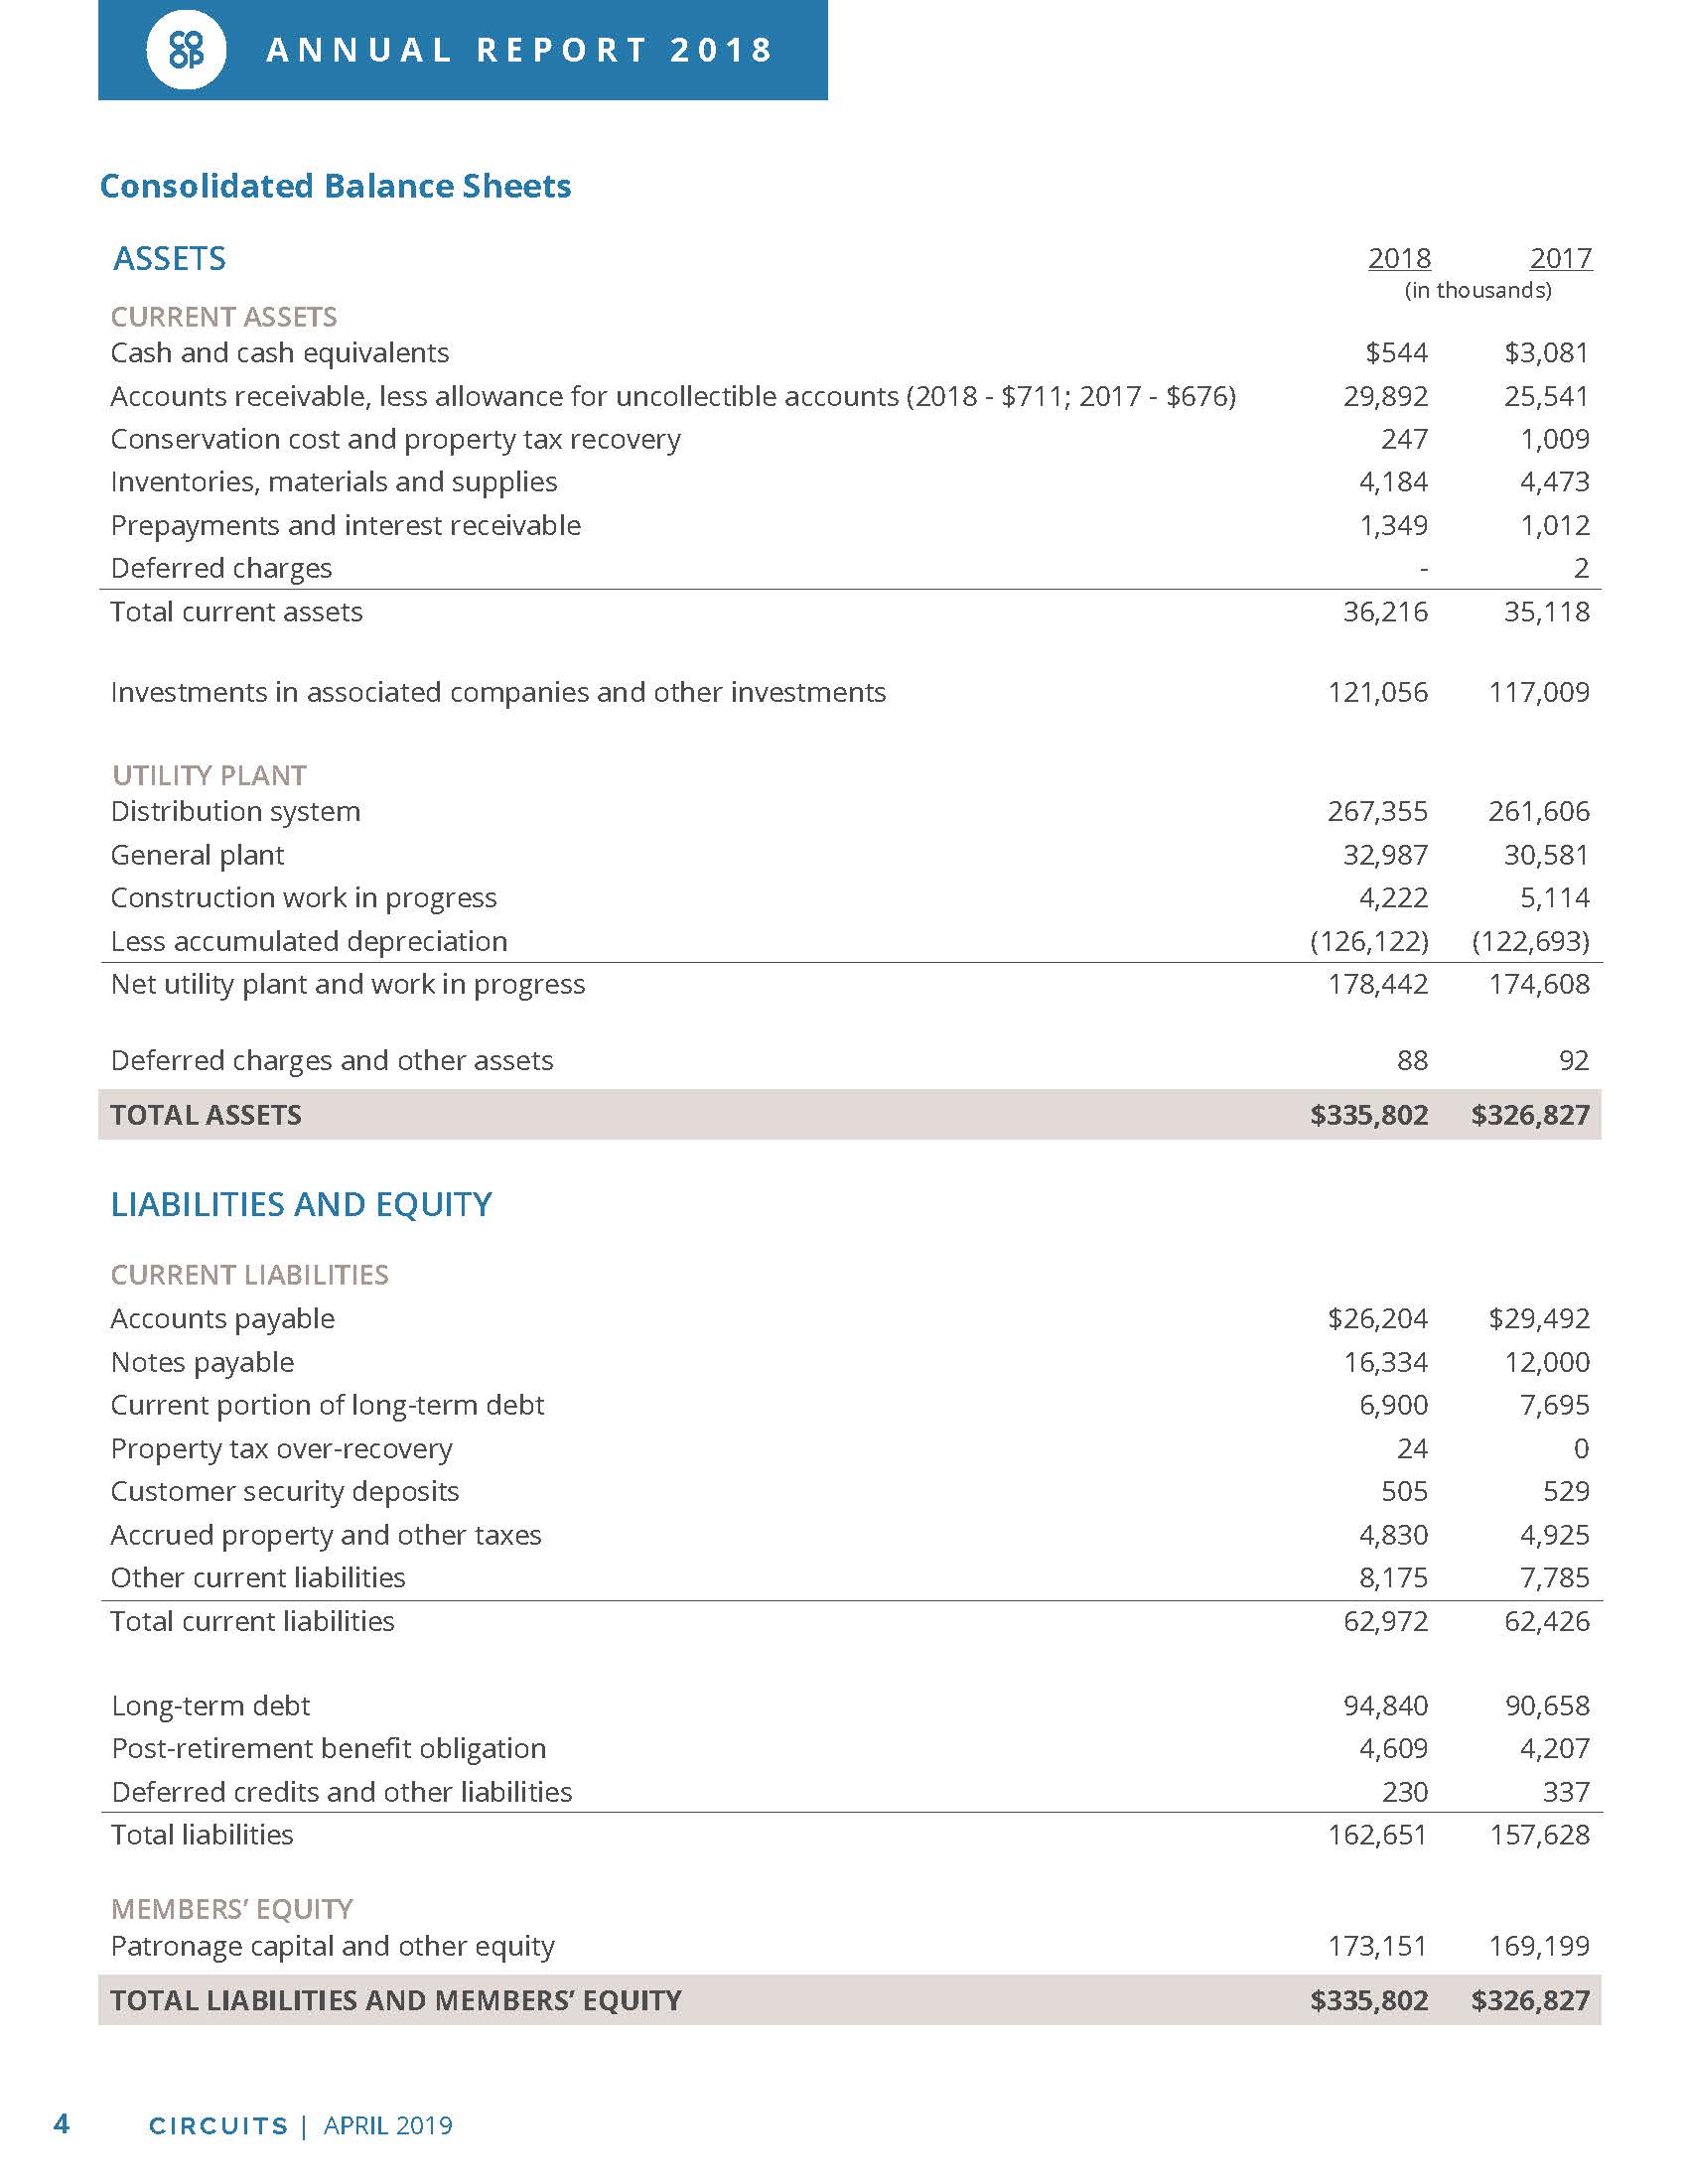 page 4 of financial statements